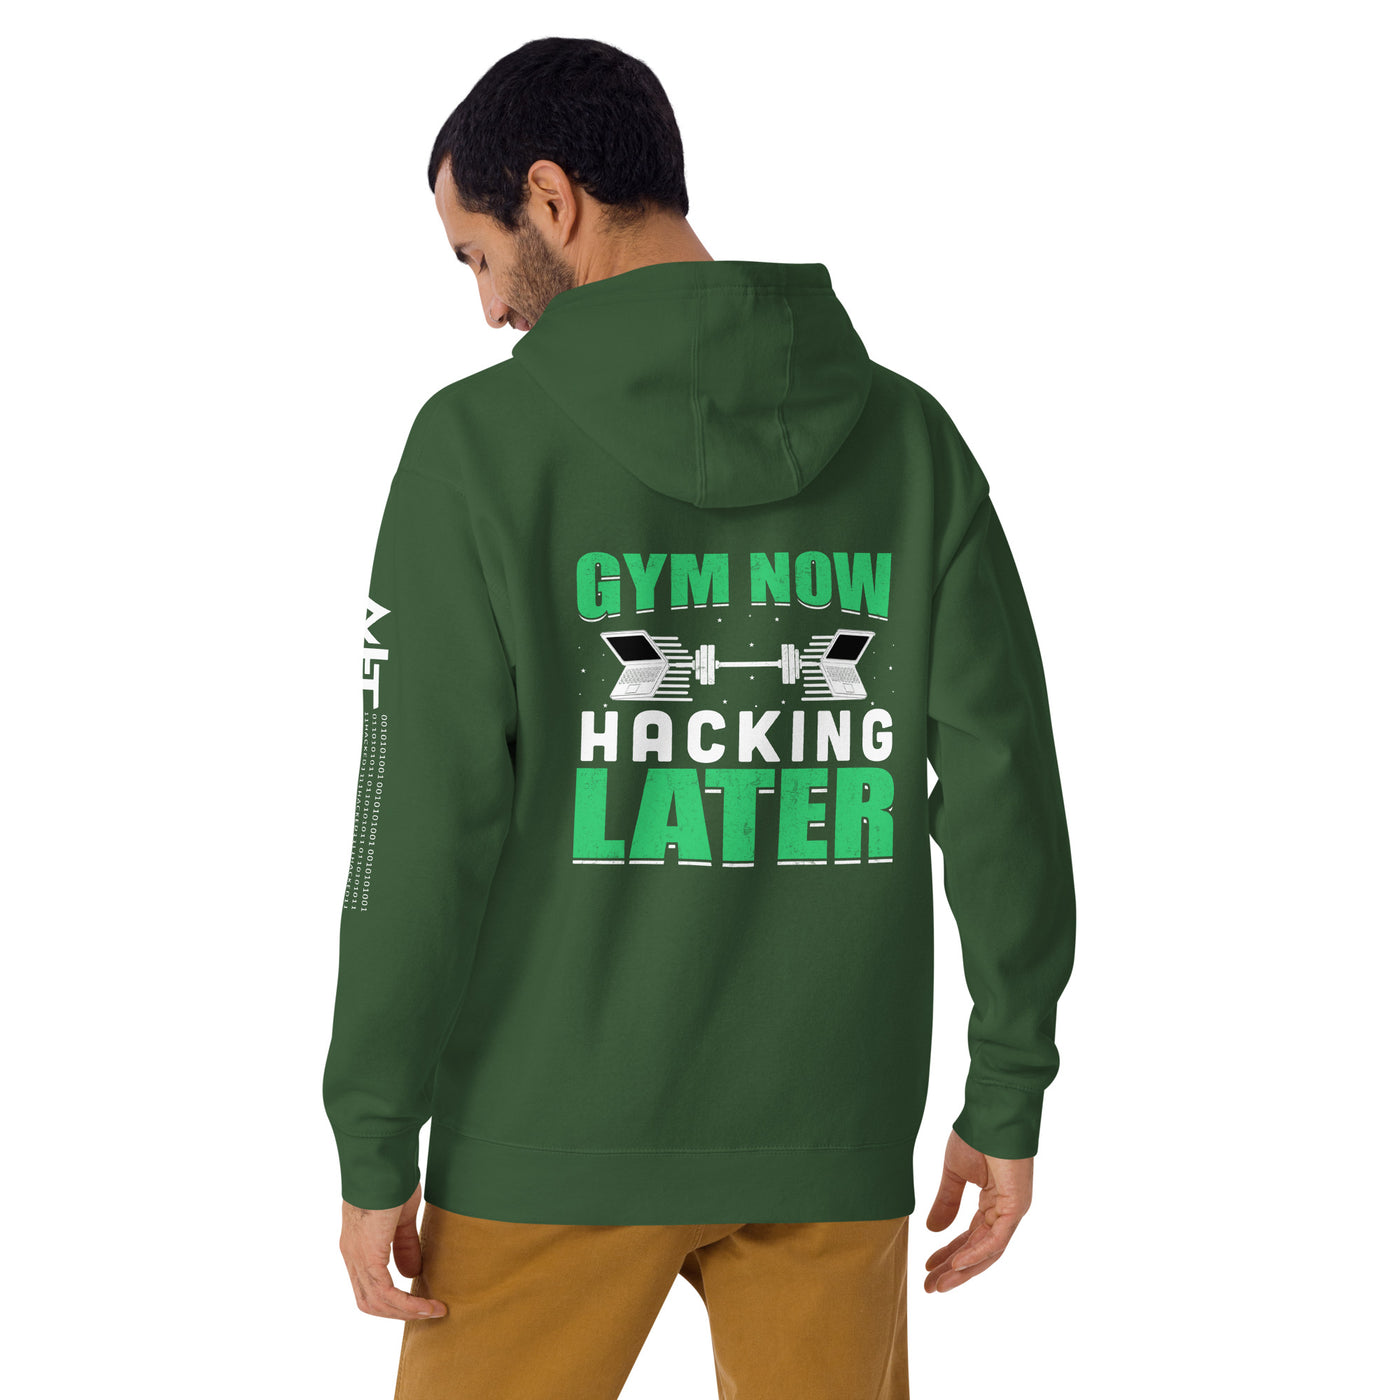 Gym now, hacking later - Unisex Hoodie (back print)